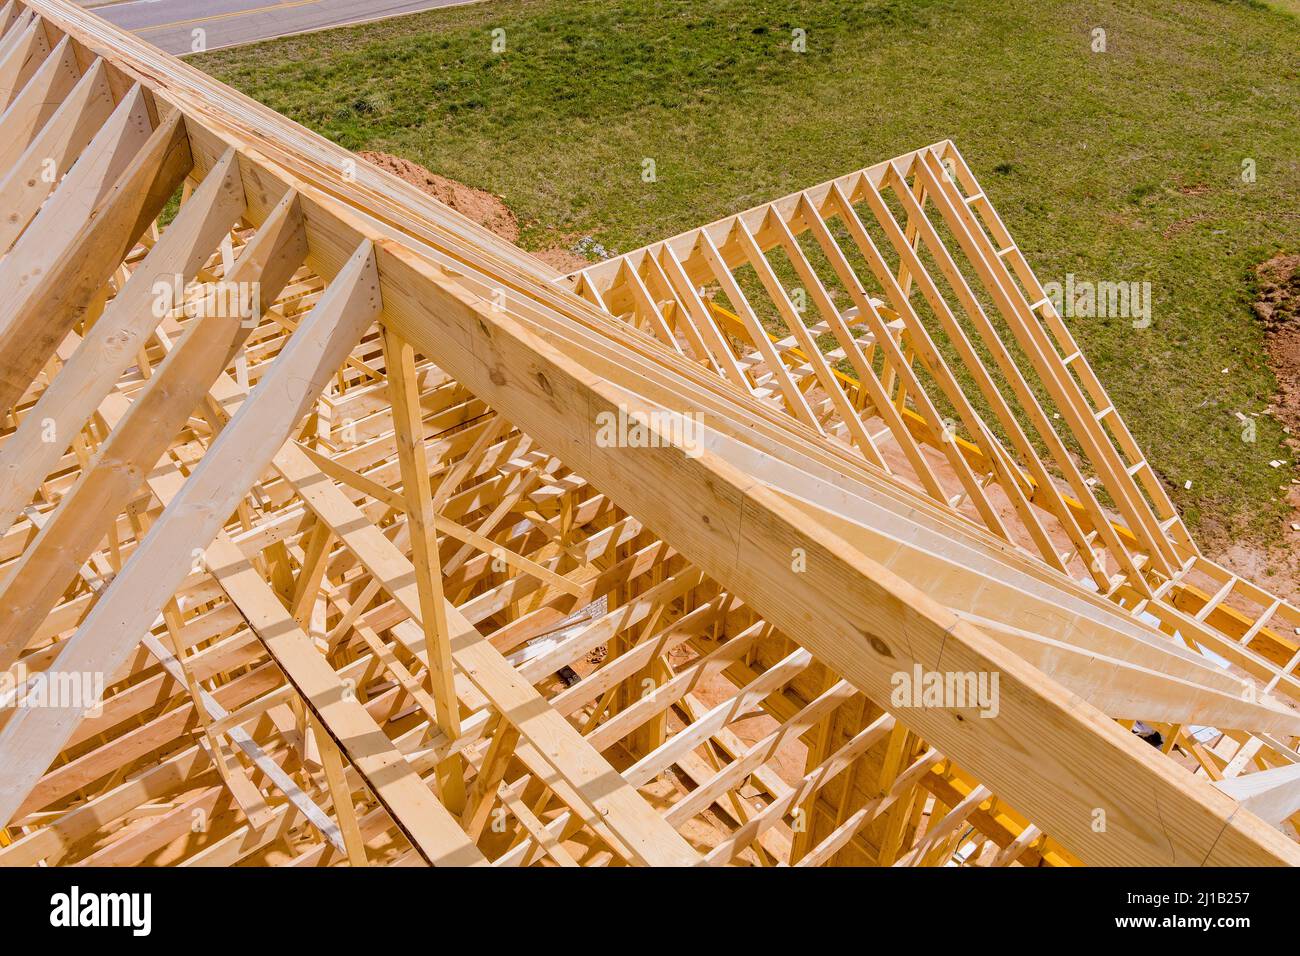 Aerial view the timber frame beam framework house stick built home under construction new build with wooden truss Stock Photo